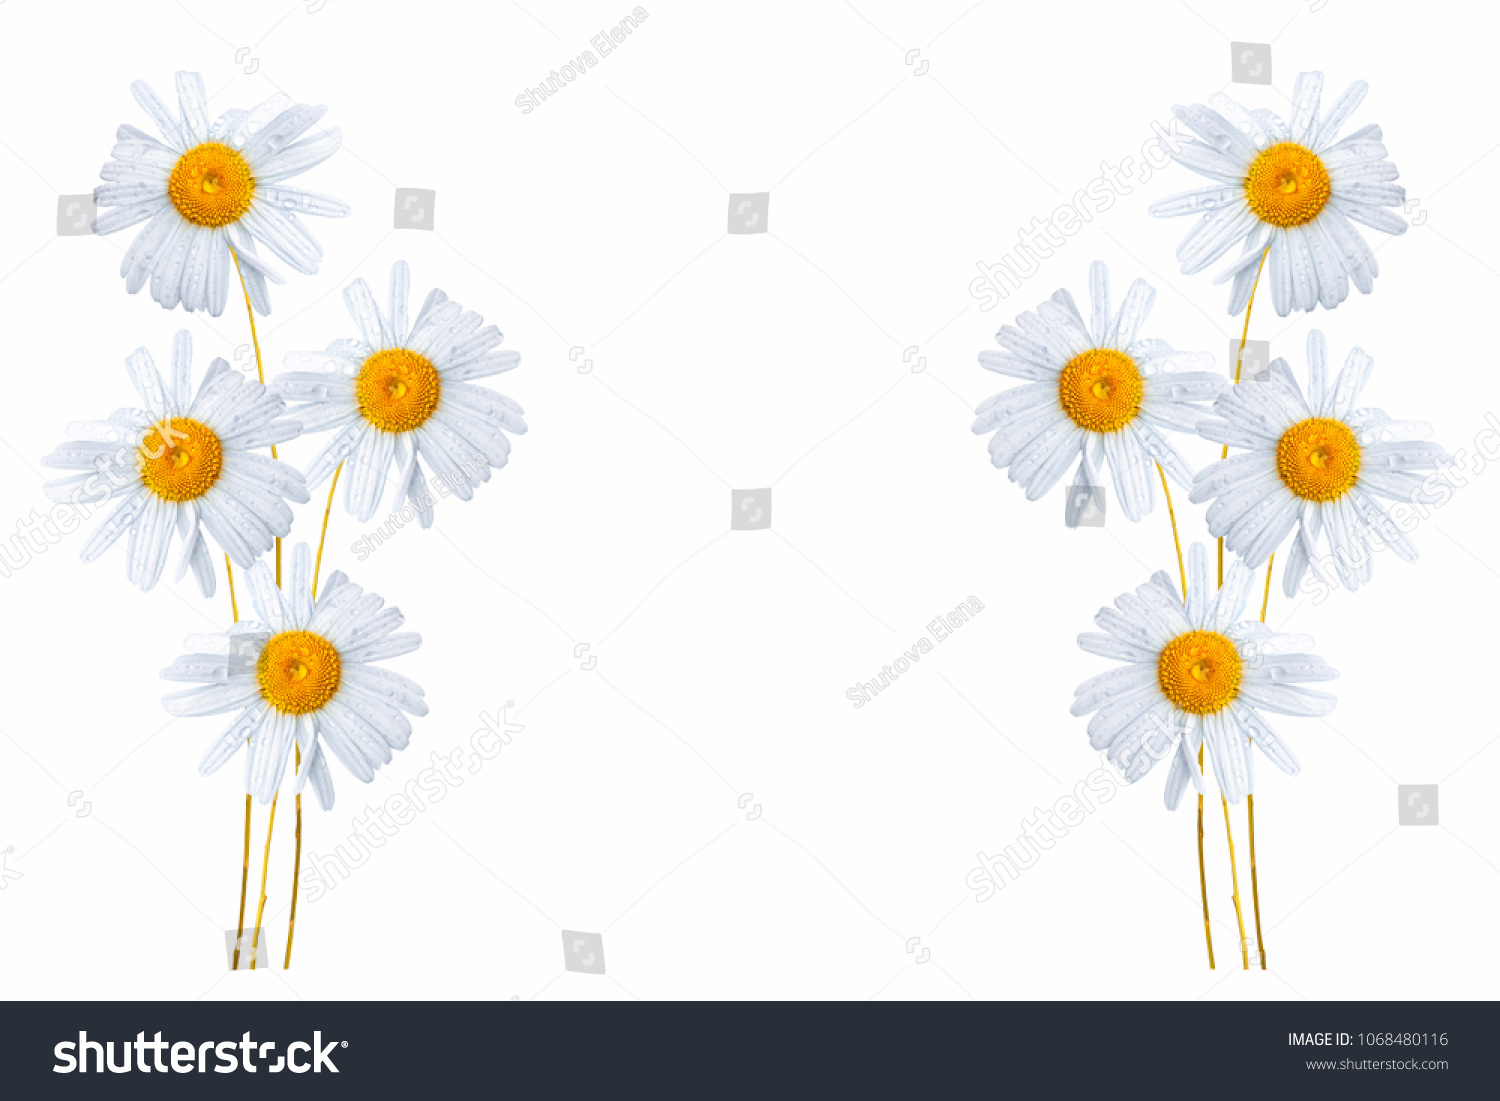 daisies summer white flower isolated on white background #1068480116